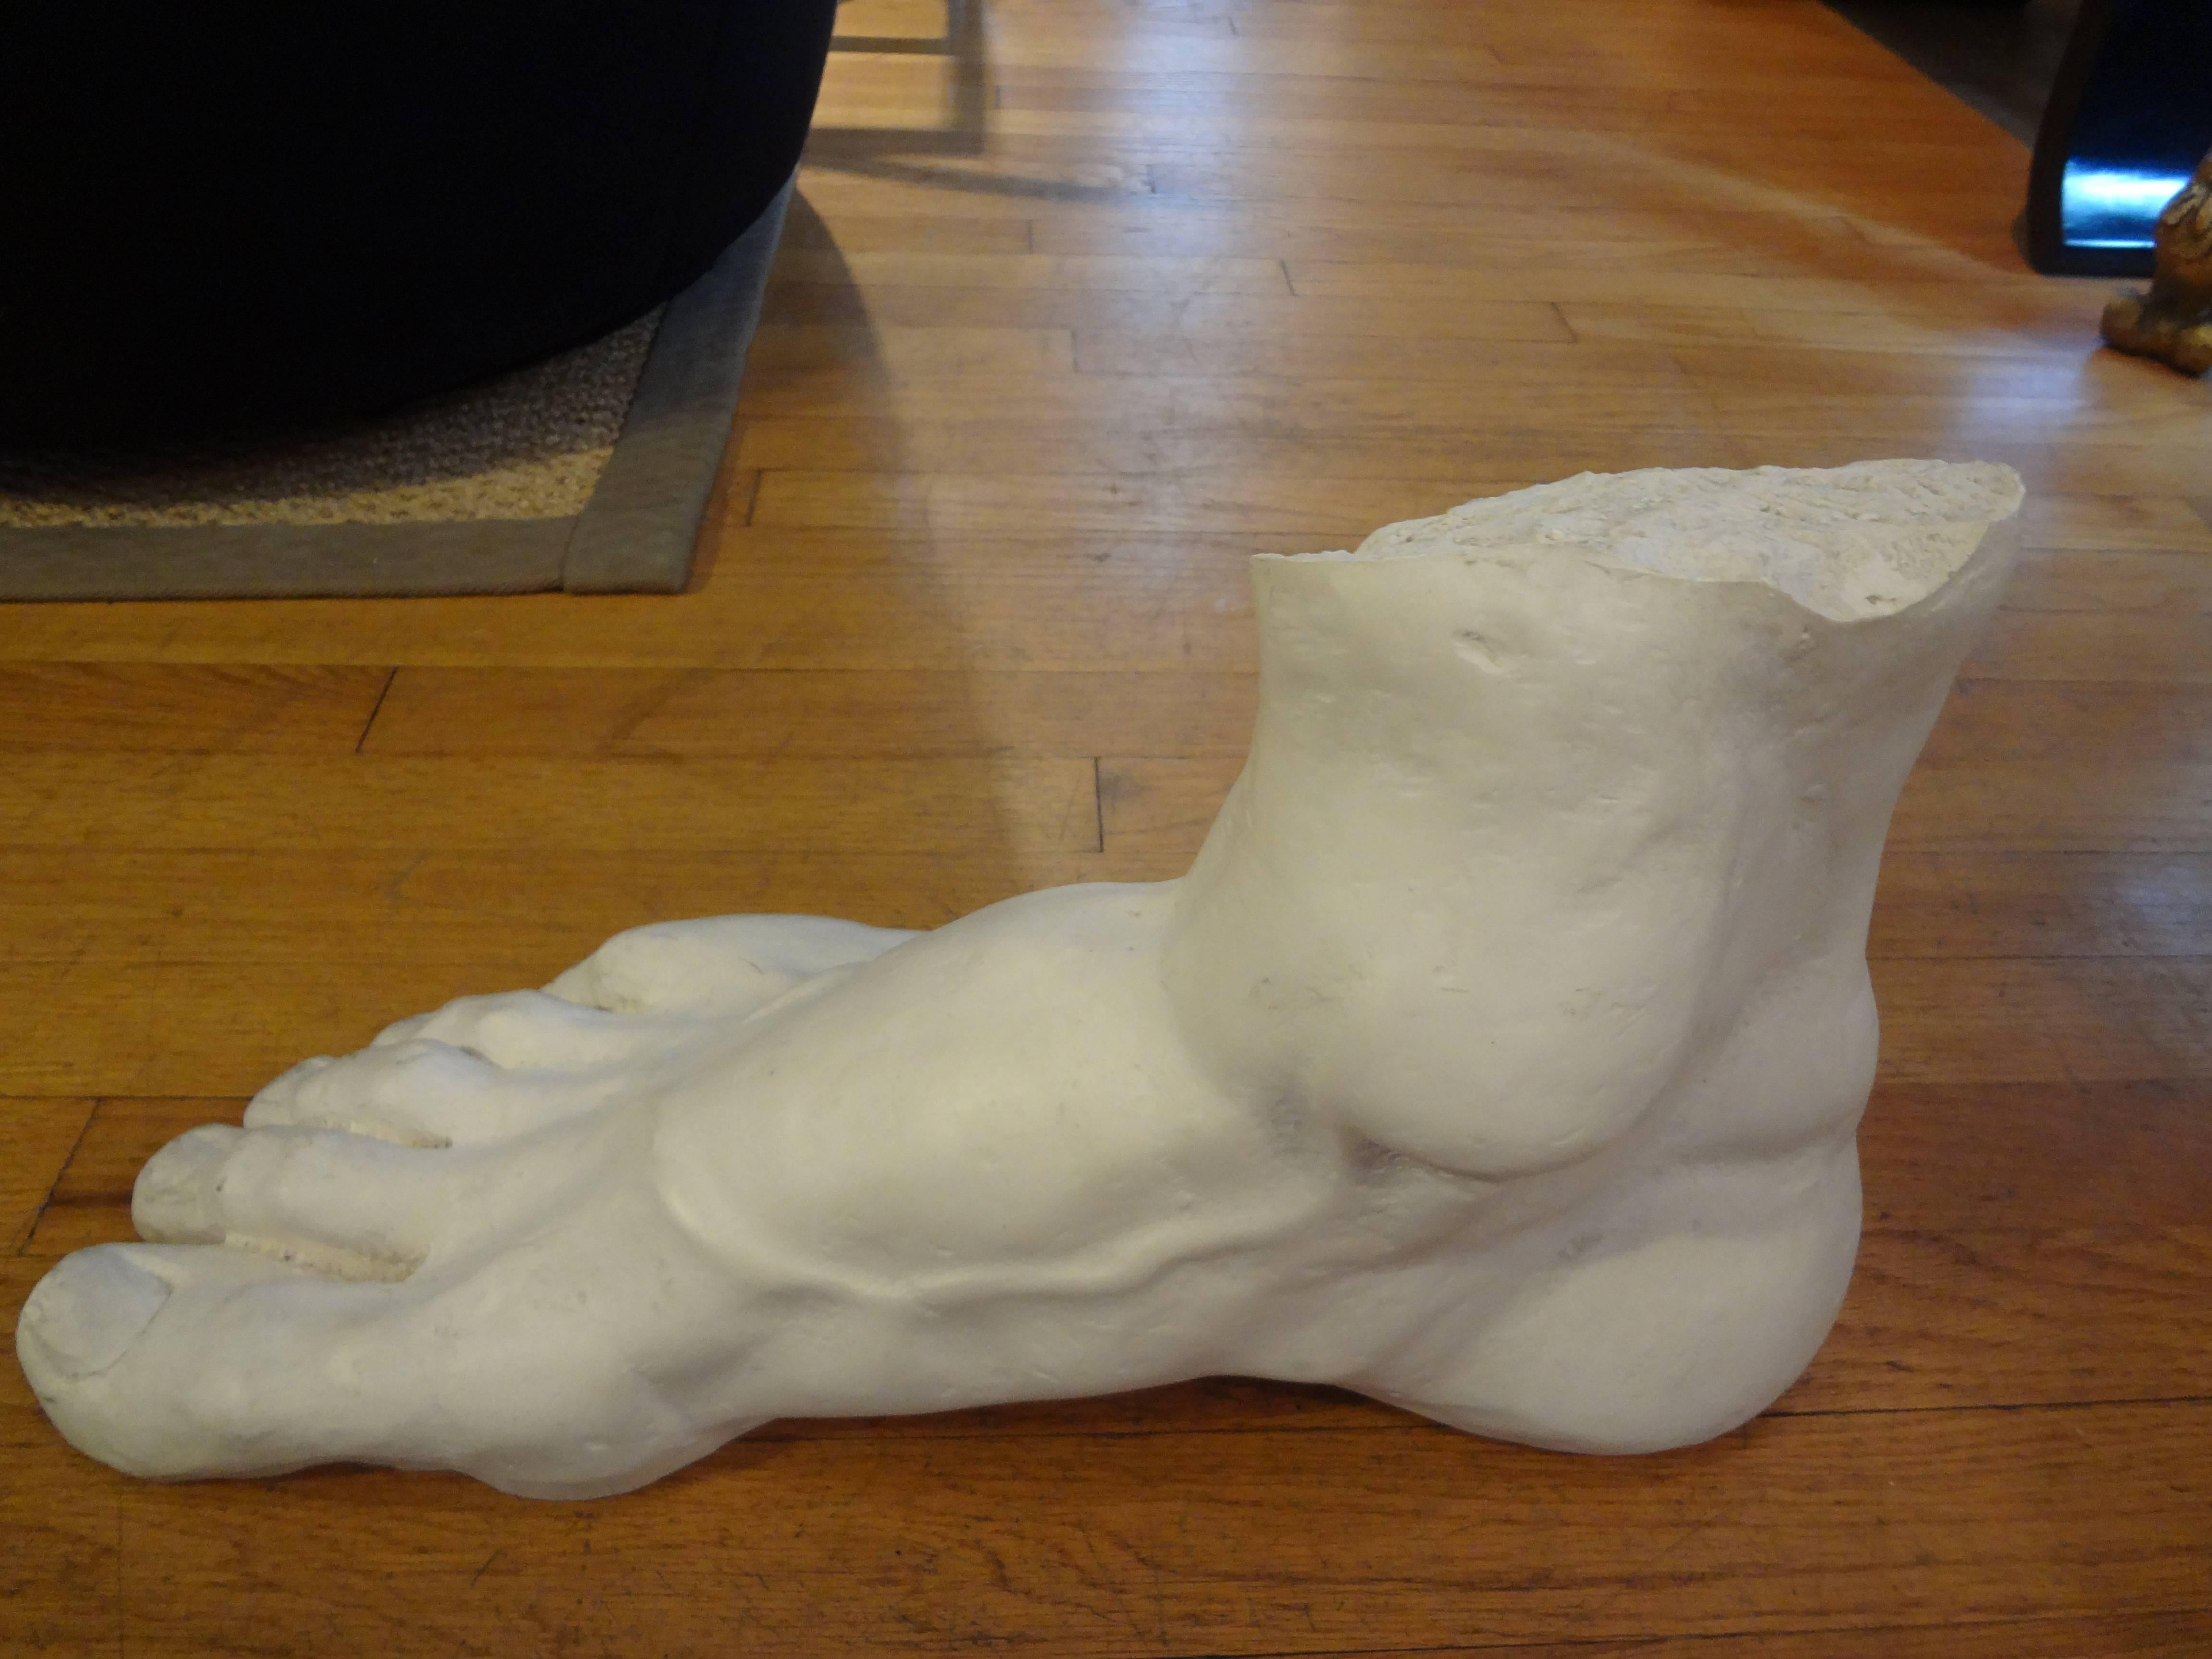 Unusually large and well detailed Classical Roman plaster foot sculpture of Hercules.